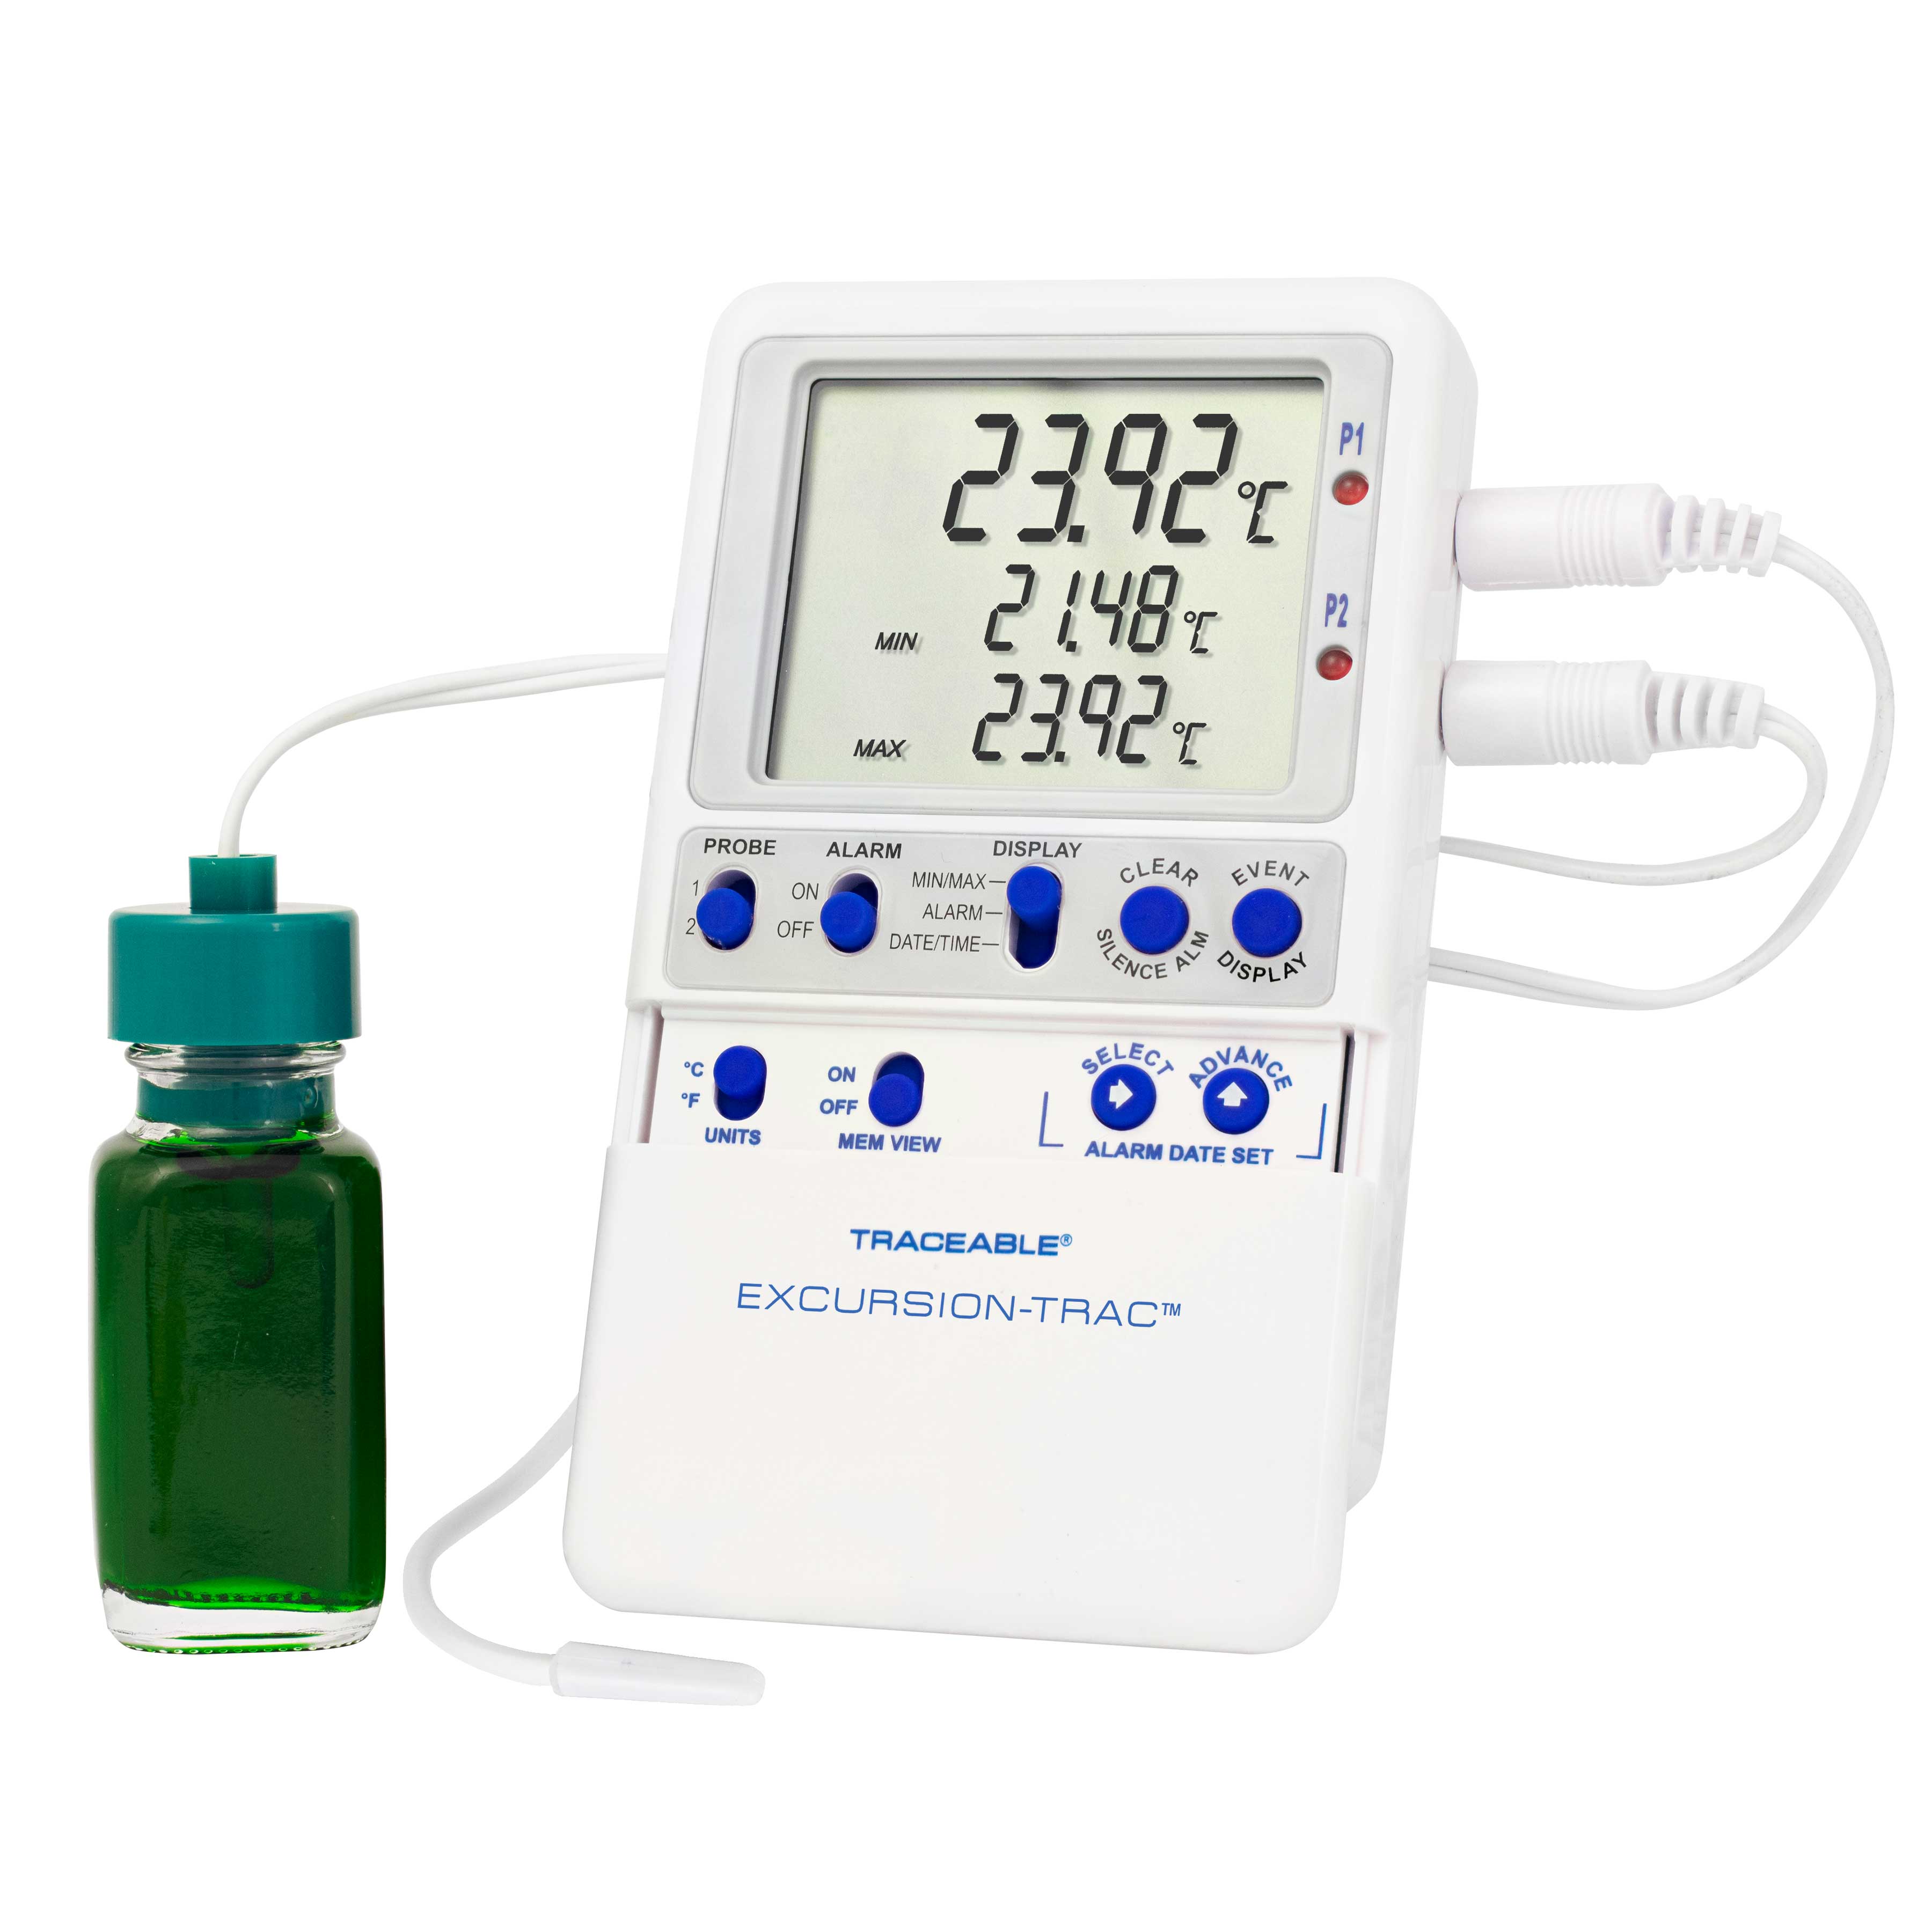 Excursion-Trac datalogging digital thermometer. TRACEABLE. Range: –50.00 to 70.00°C. Accuracy: ±0.25°C. Resolution: 0.01°C. Probes: 1 bottle and 1 BulletTM probe. Application: Refrigerators and Freezers